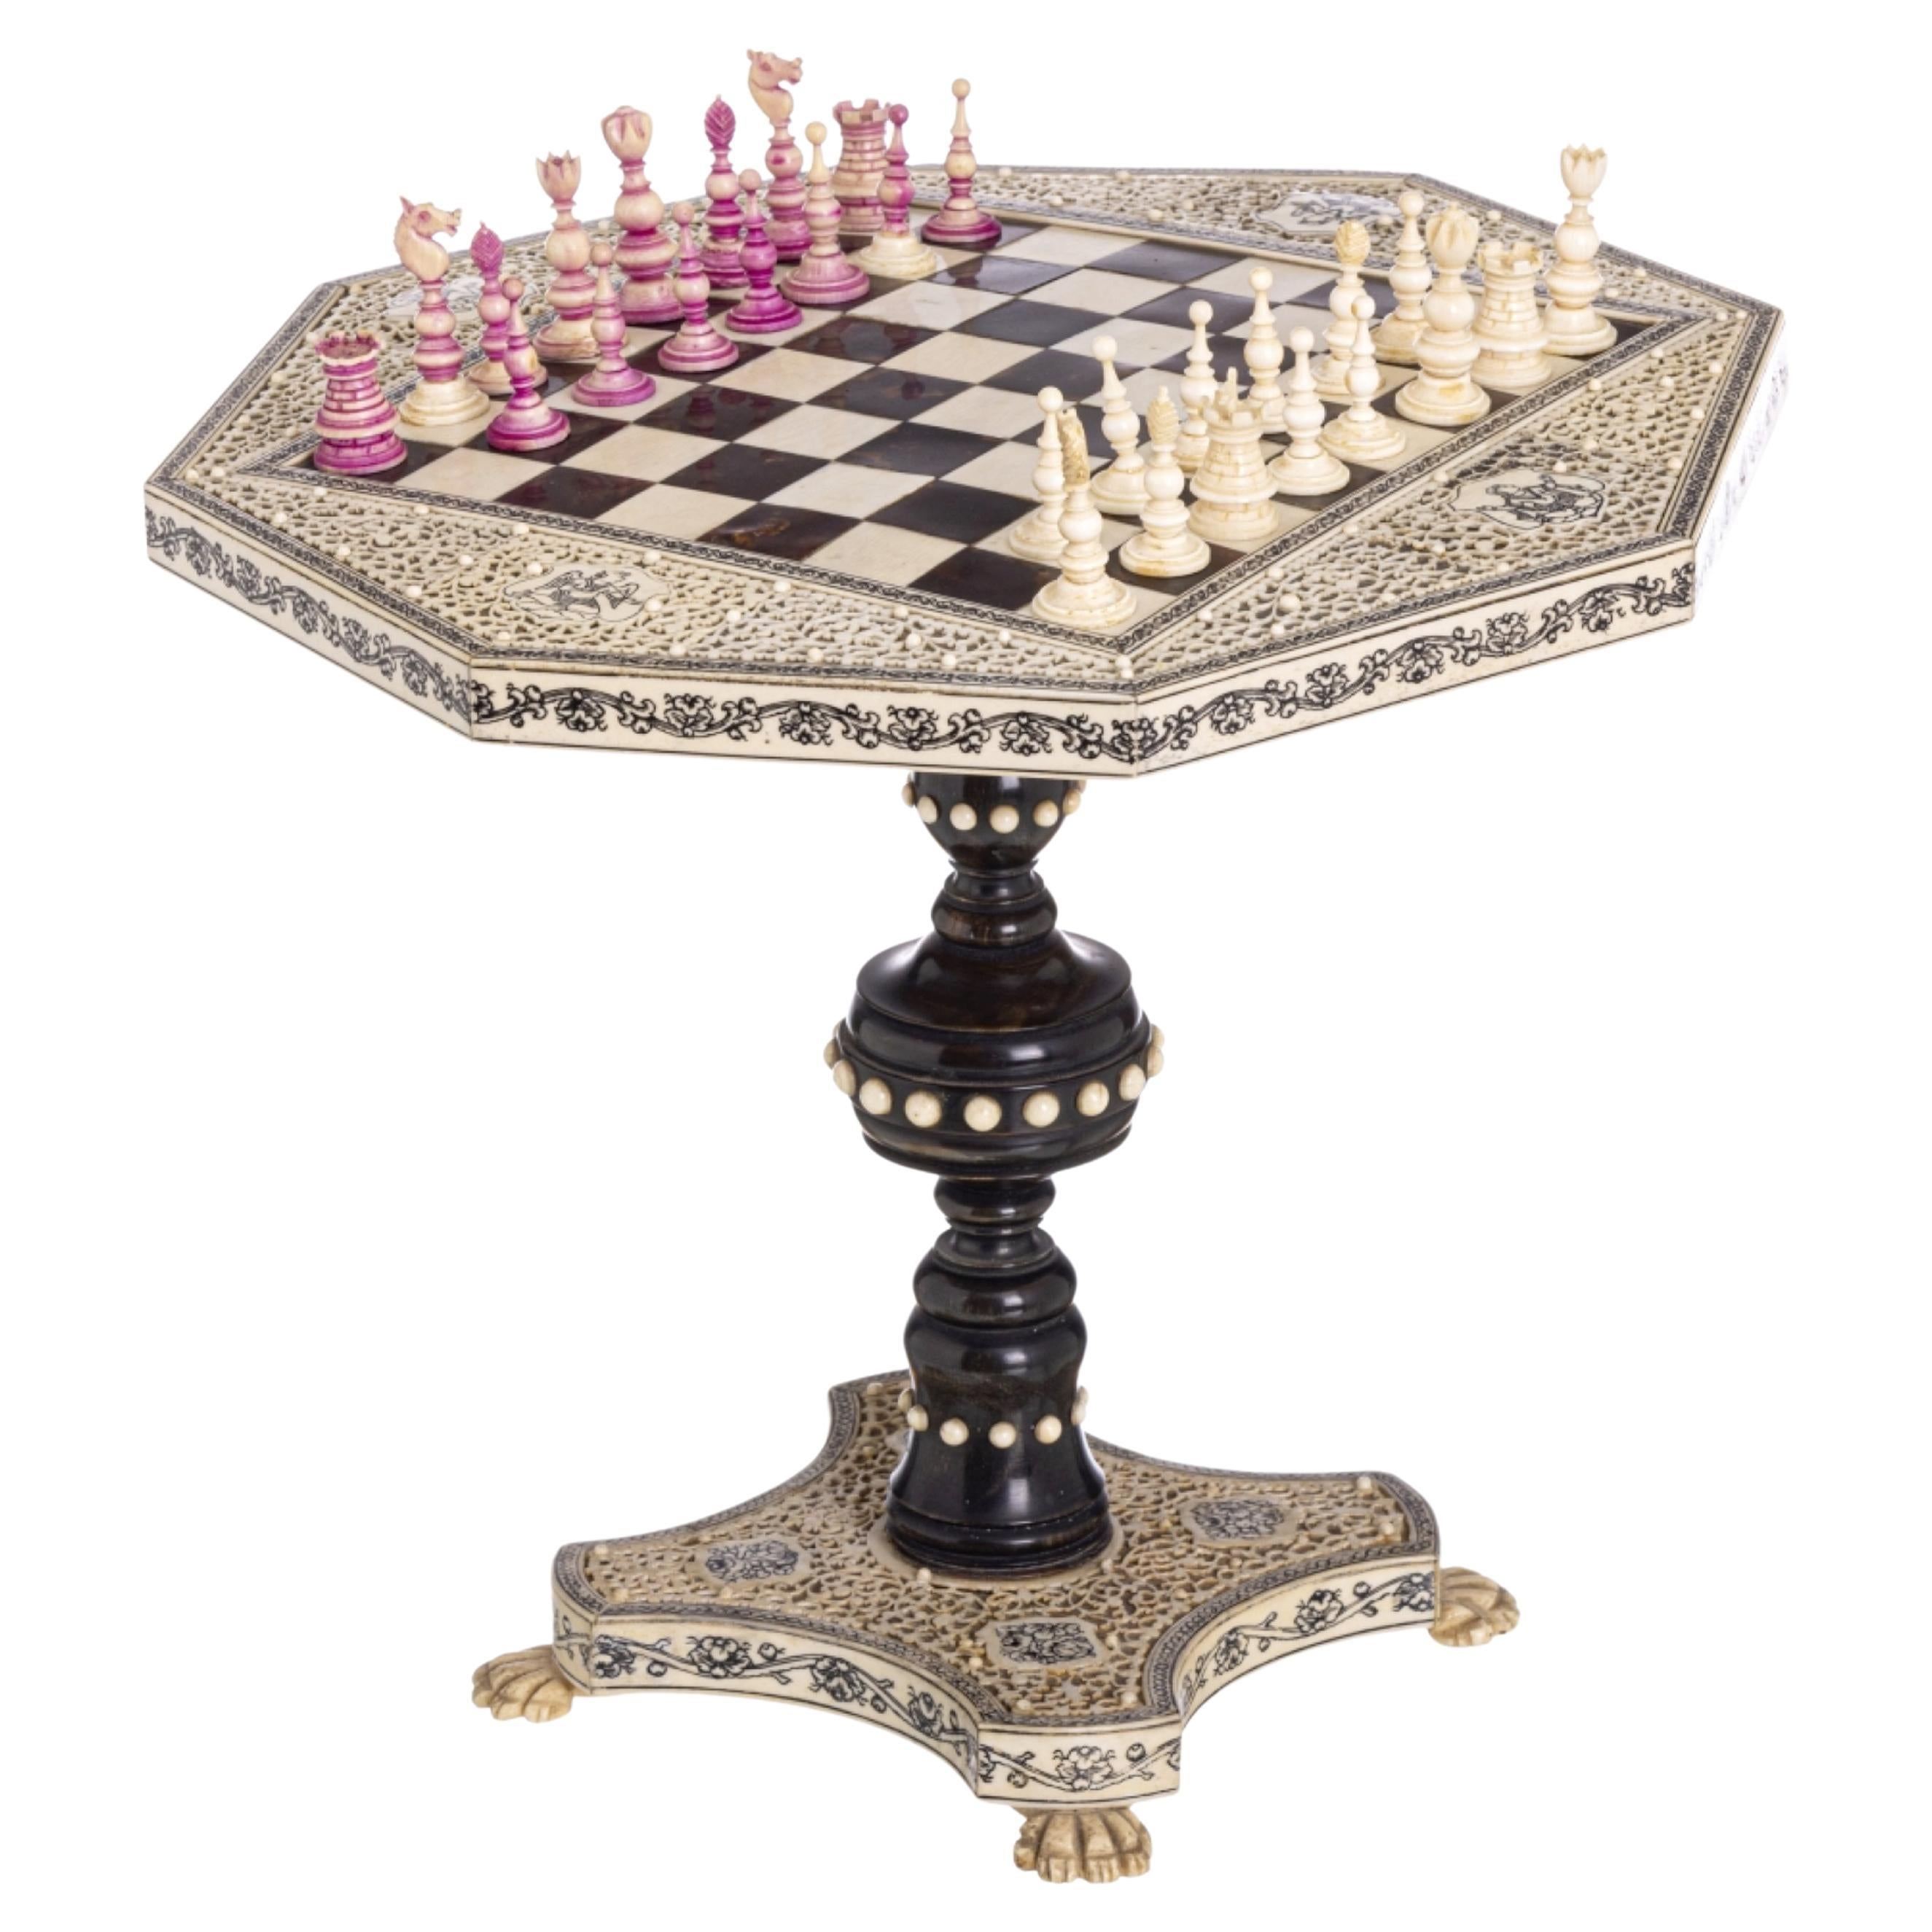 MINIATURE GAME TABLE MIT CHESS-PIECES  Anglo-indisches 19. Jahrhundert 